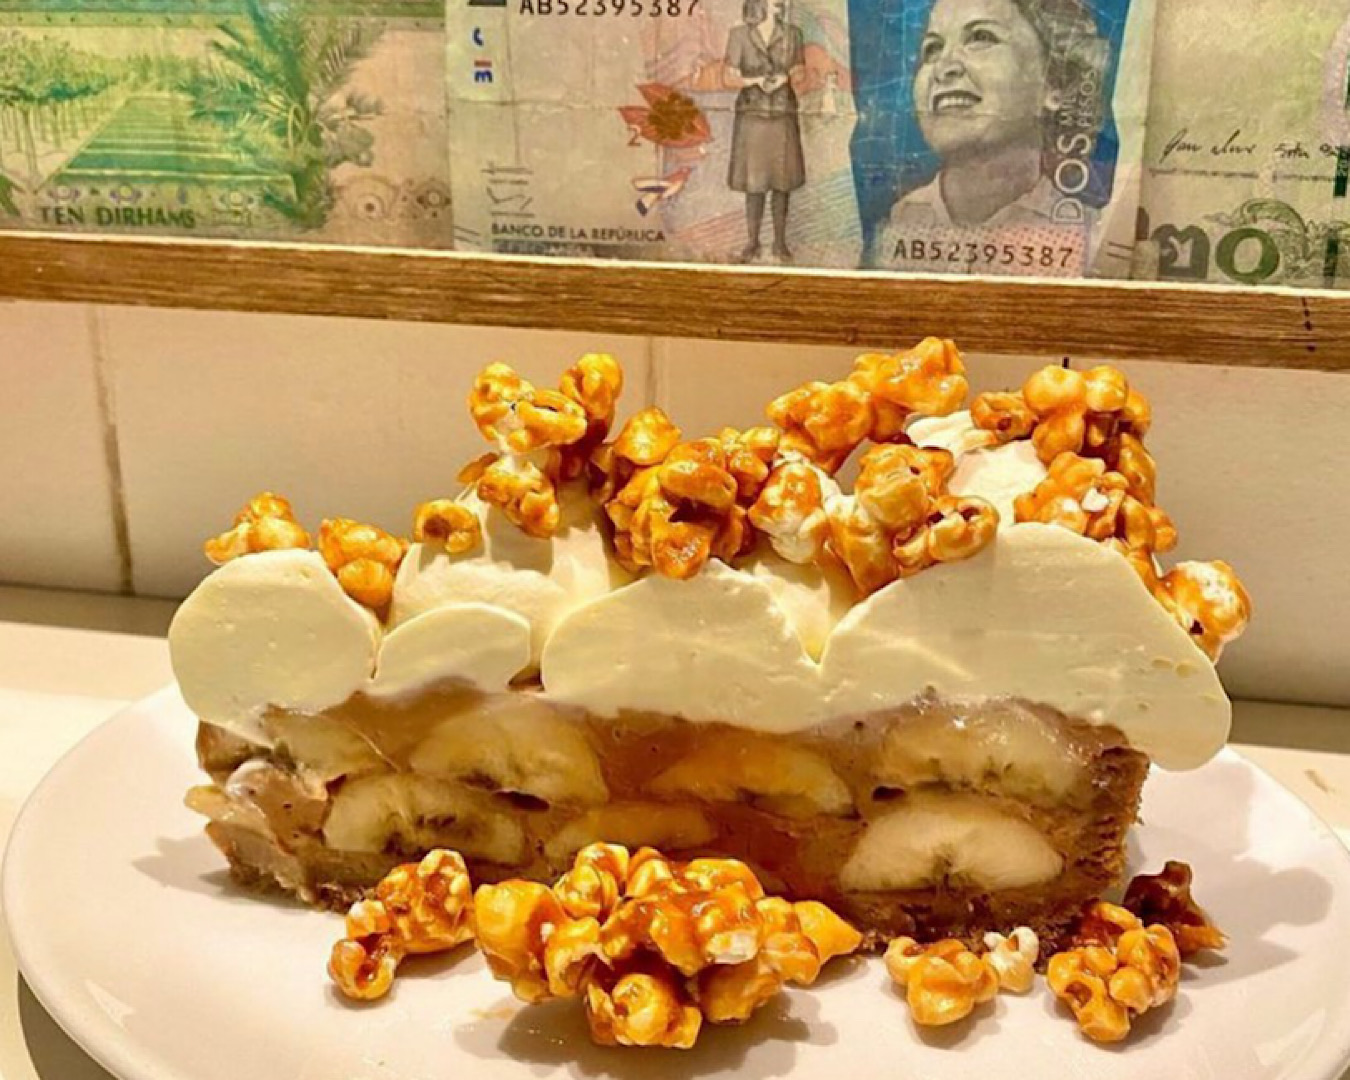 A mouth-watering cross-section of The Fed’s banana and toffee pie topped with whipped cream and caramel popcorn.  